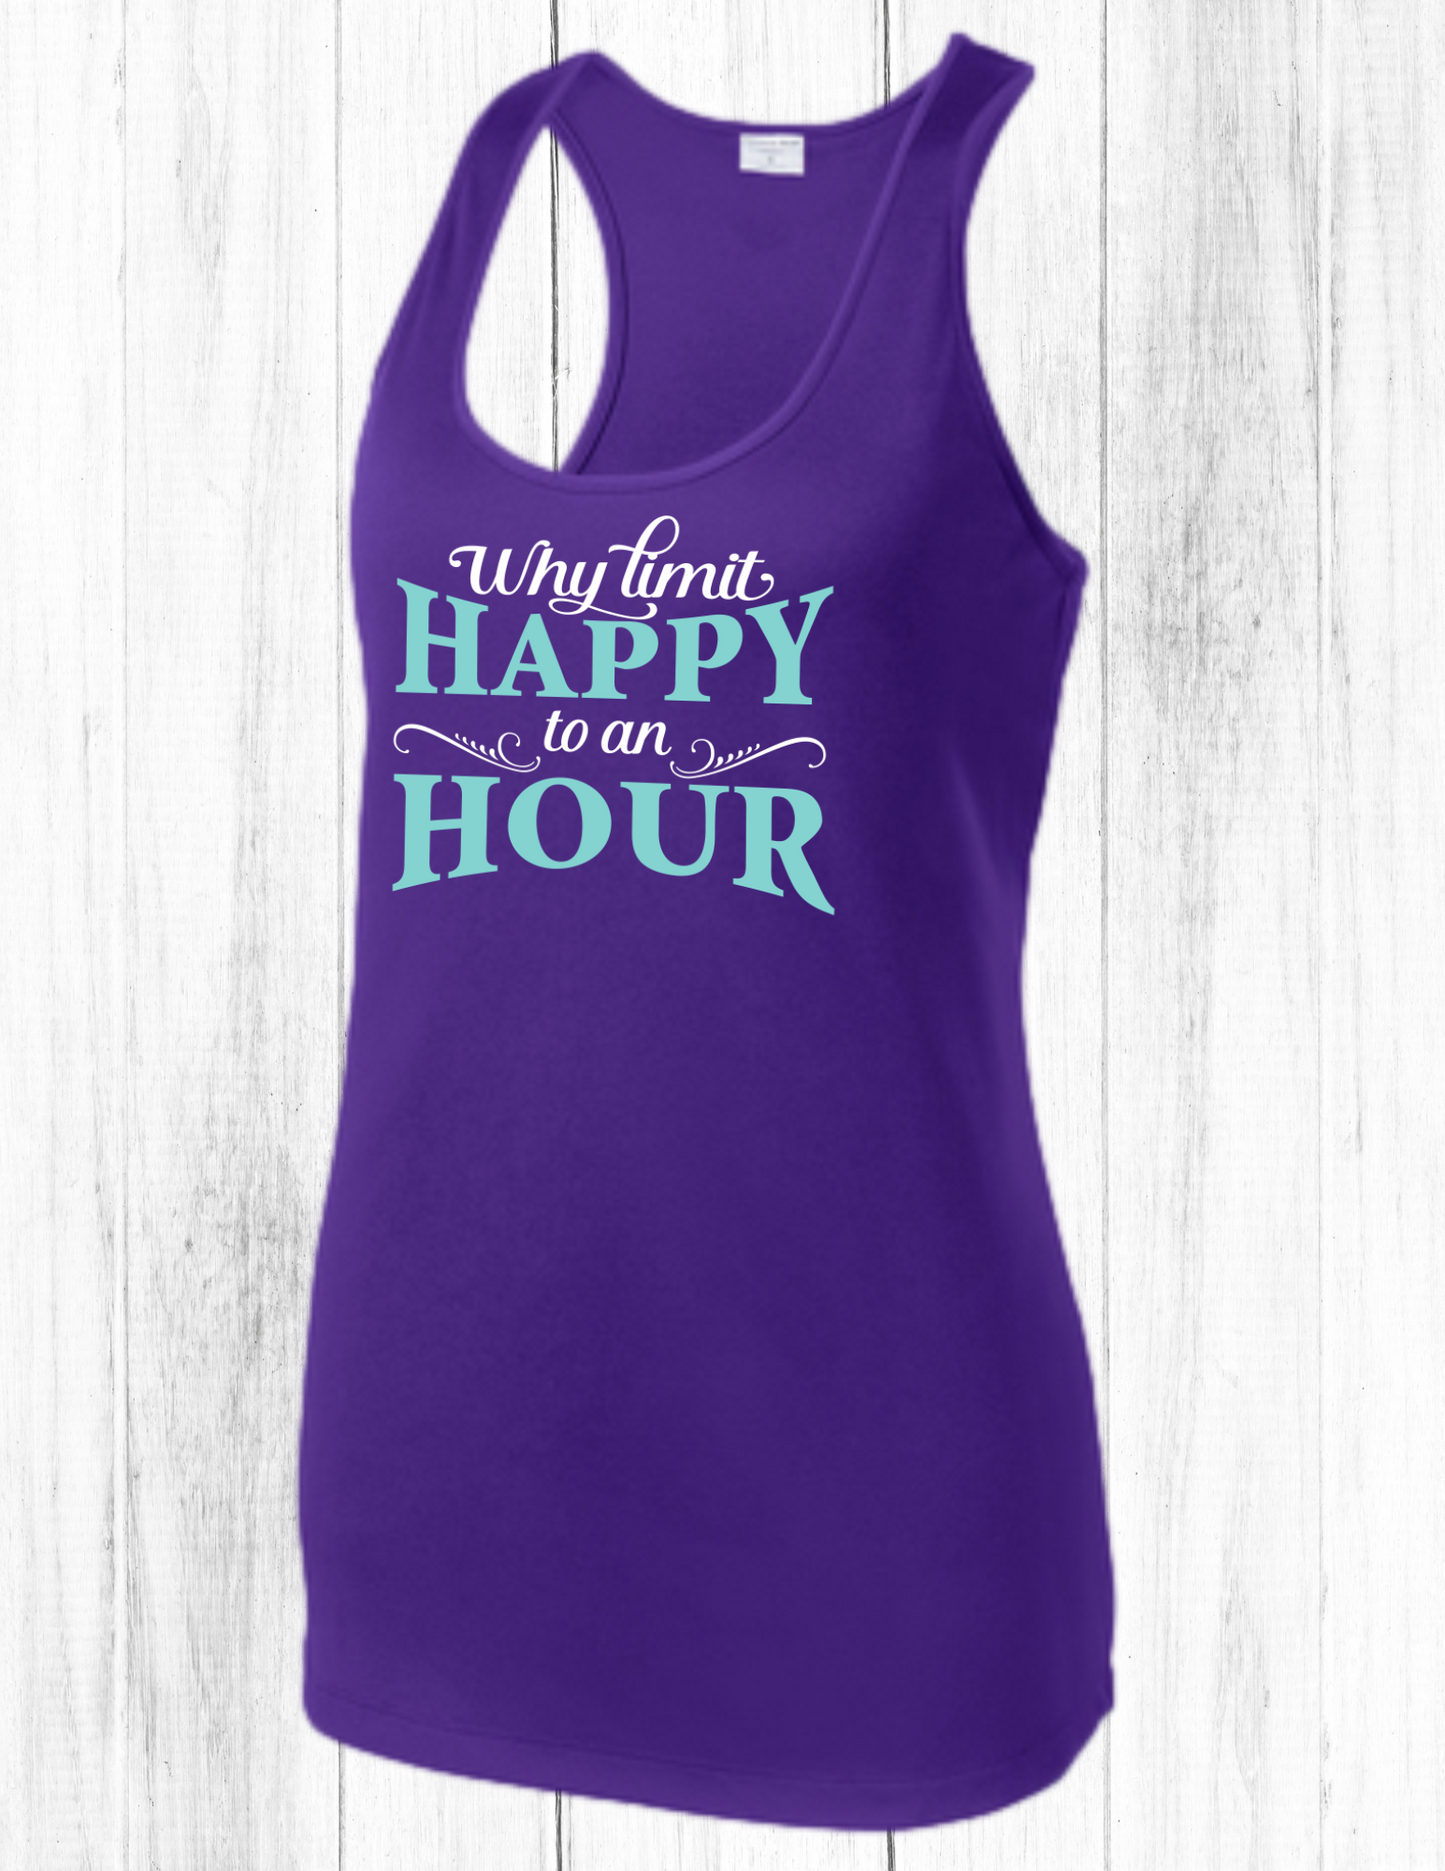 Why Limit Happy to an Hour - Women's Tank Top